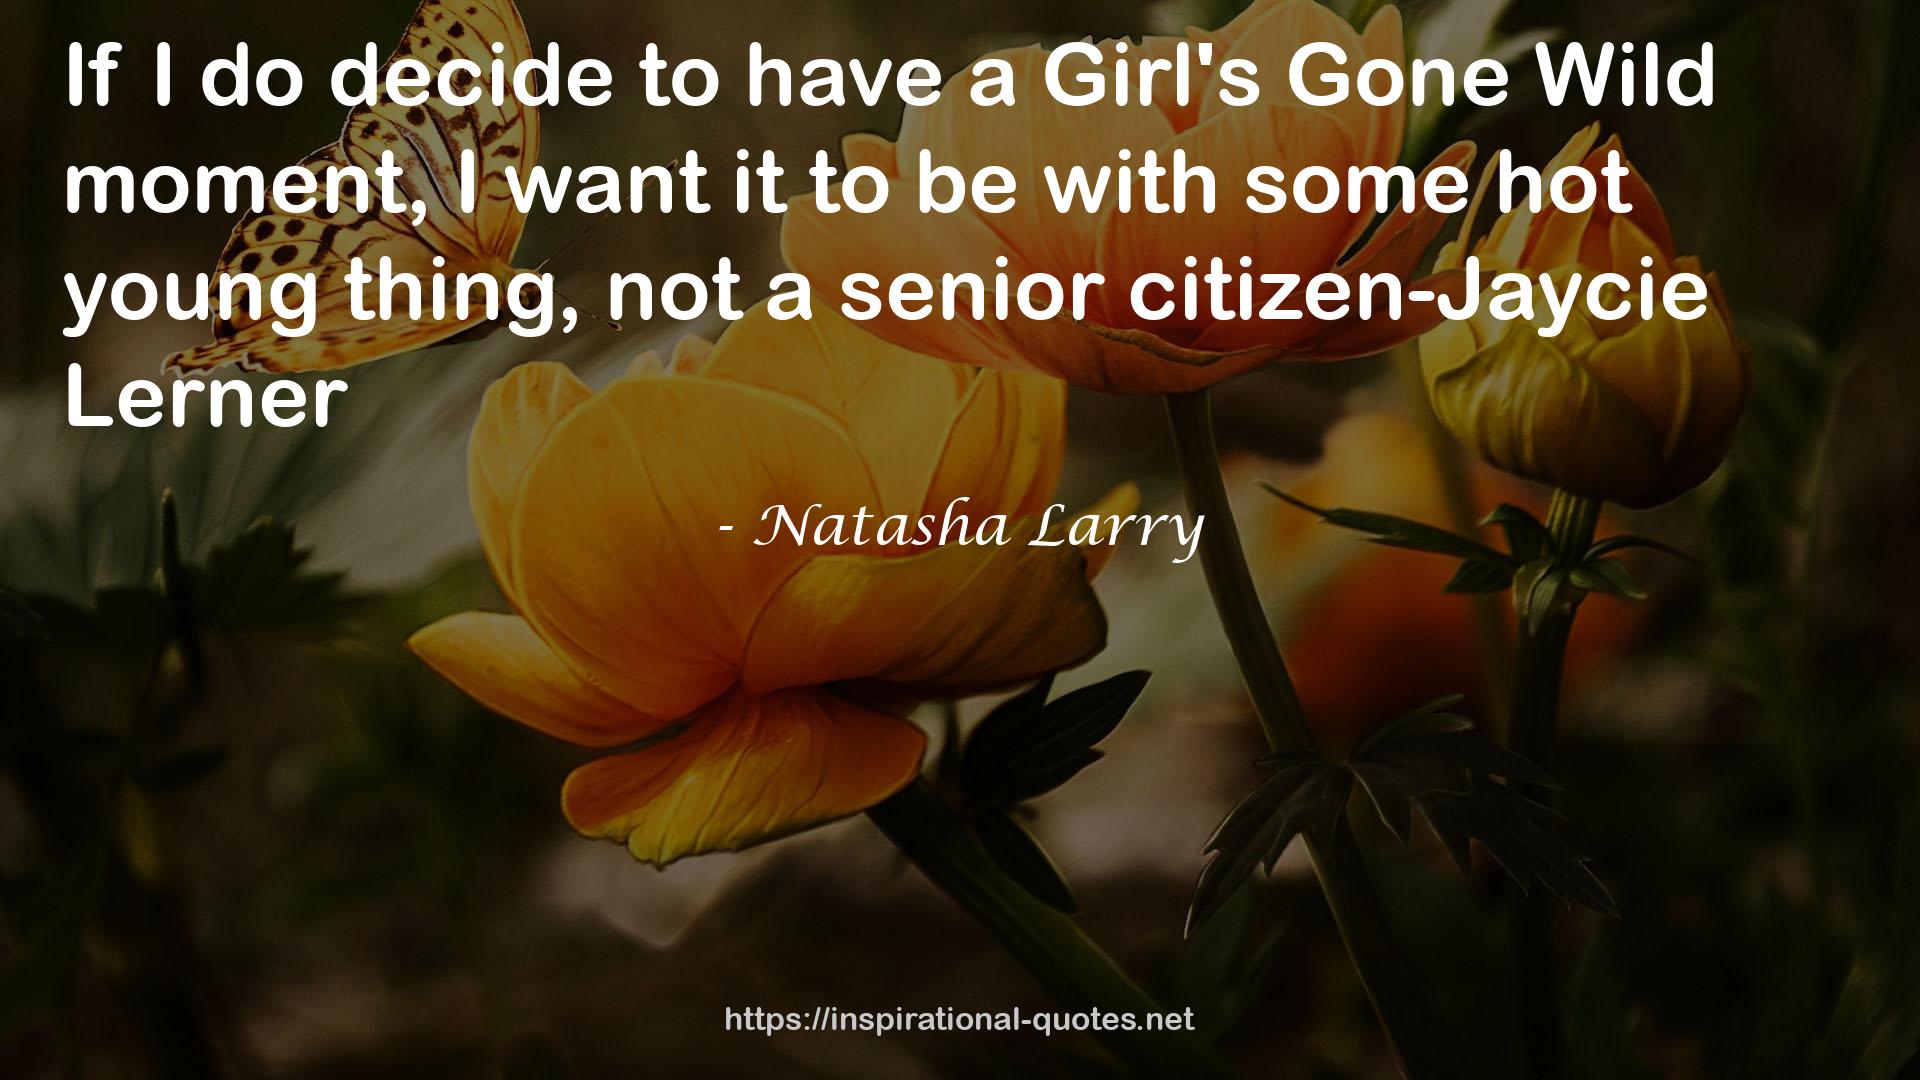 Natasha Larry quote : If I do decide to have a Girl's Gone Wild moment, I want it to be with some hot young thing, not a senior citizen-Jaycie Lerner